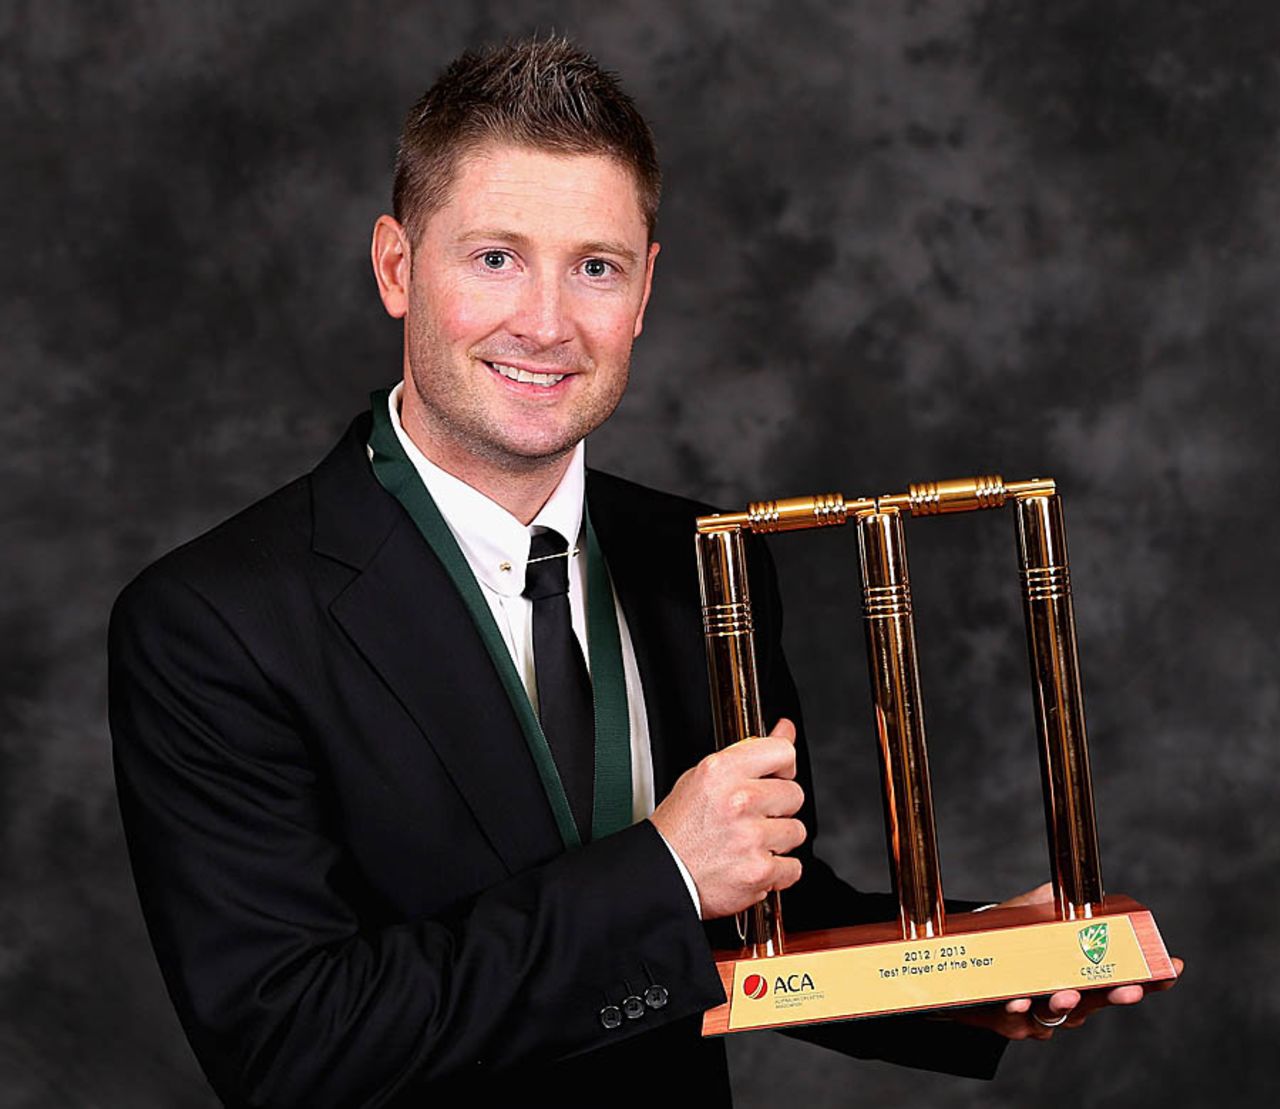 Michael Clarke won the Test Player of the Year award, Melbourne, February 4, 2013